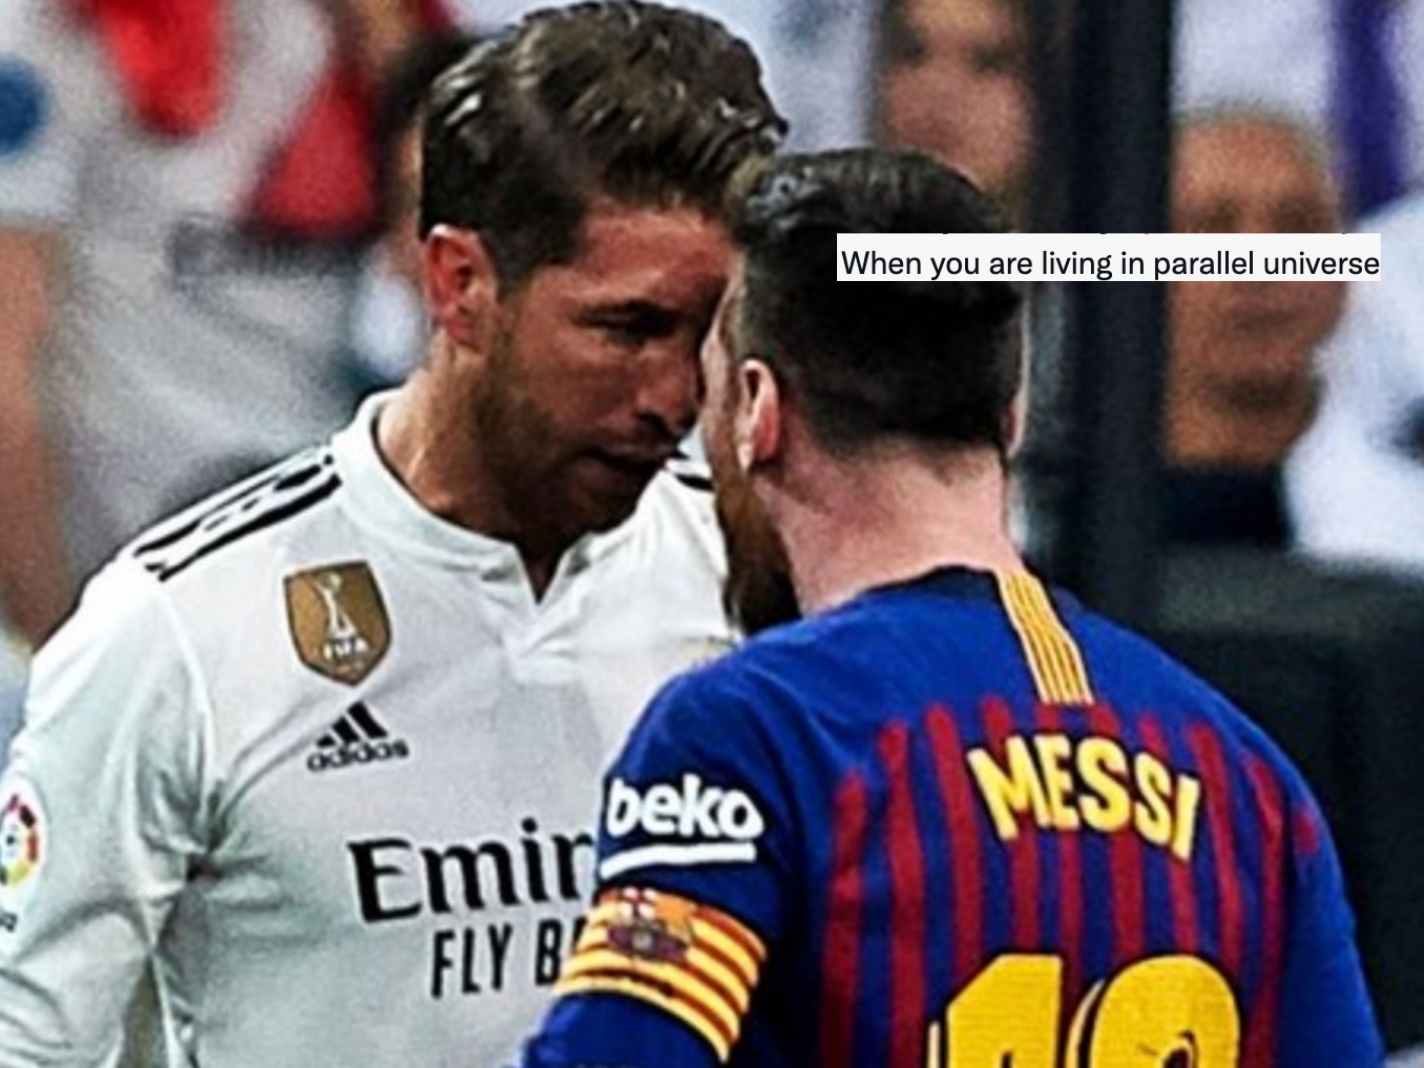 Unthinkable: This photo of Sergio Ramos and Lionel Messi hugging is freaking fans out